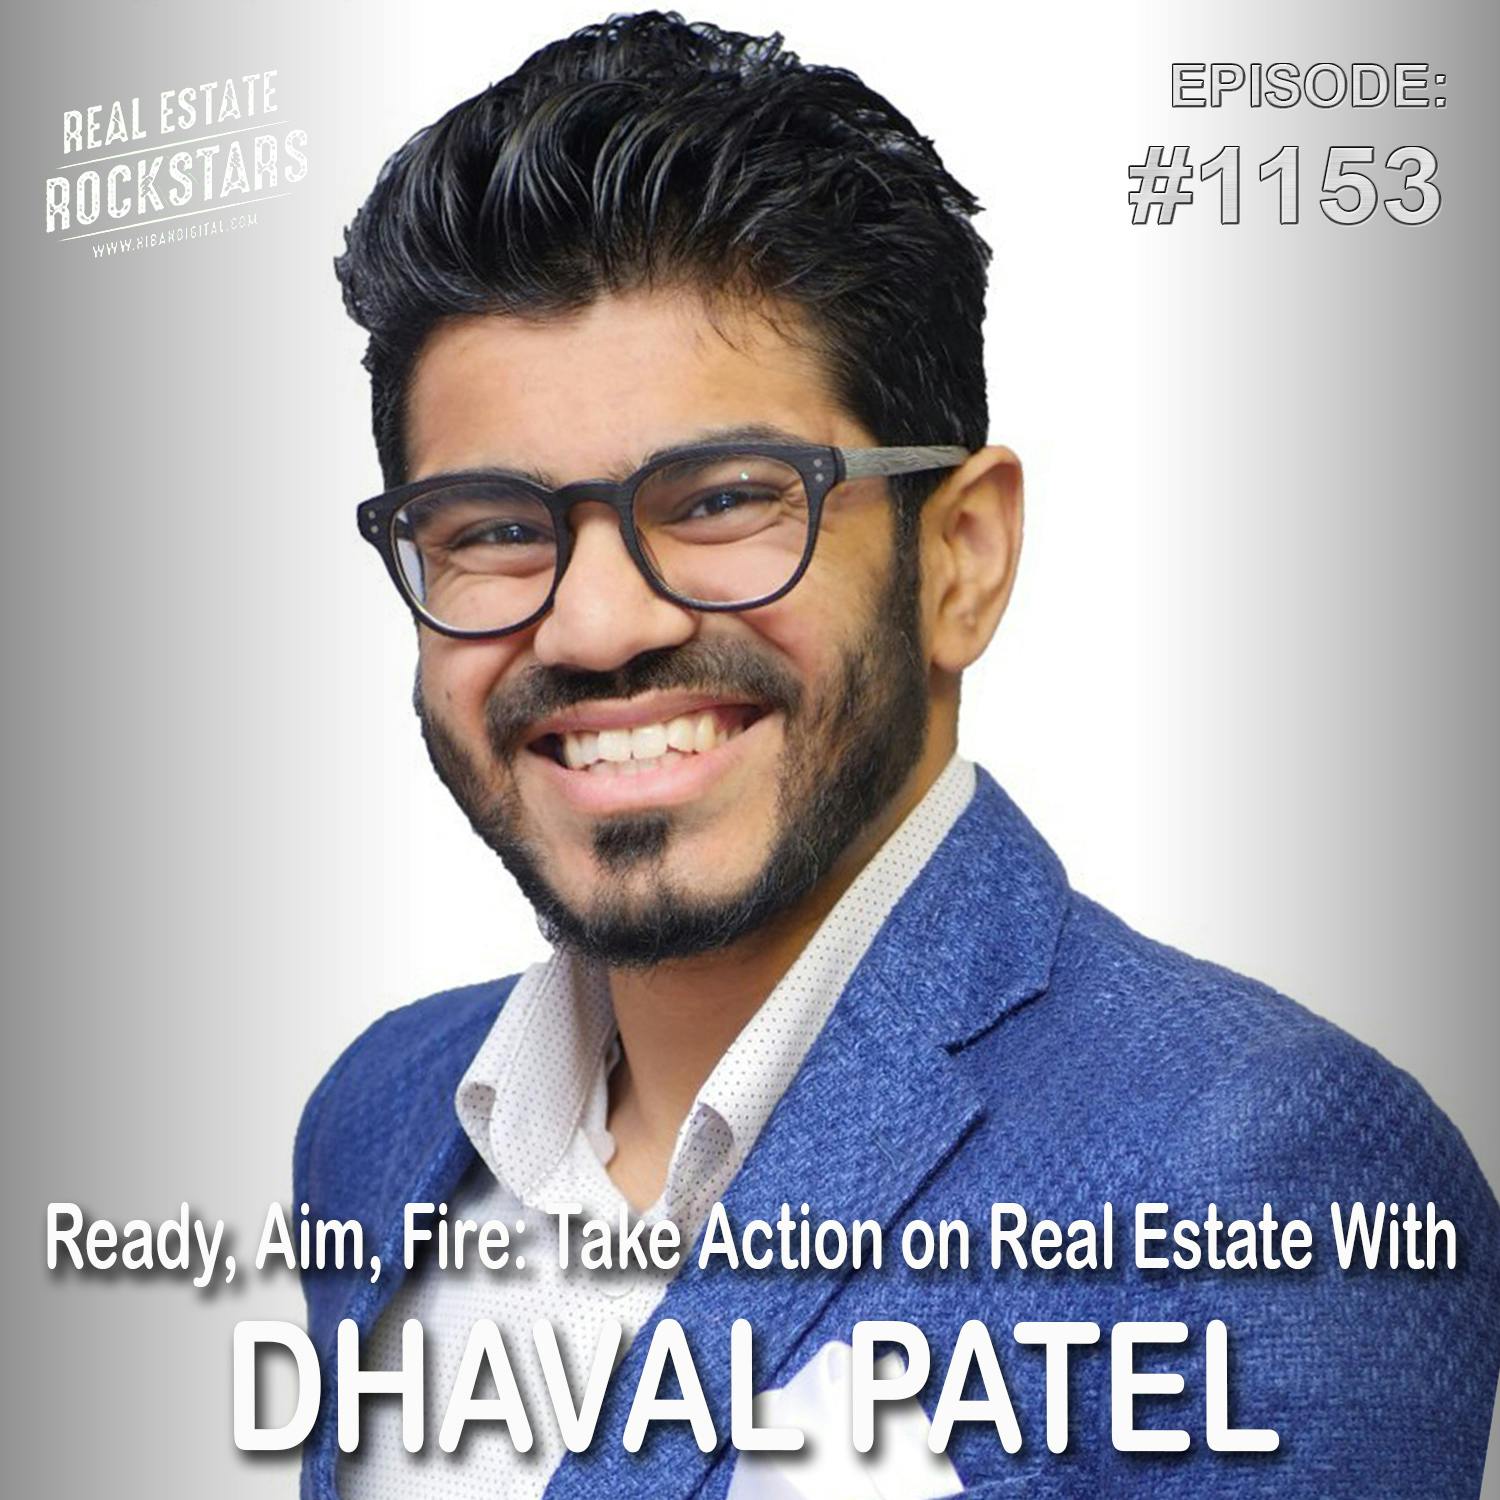 1153: Ready, Aim, Fire: Take Action on Real Estate With Dhaval Patel